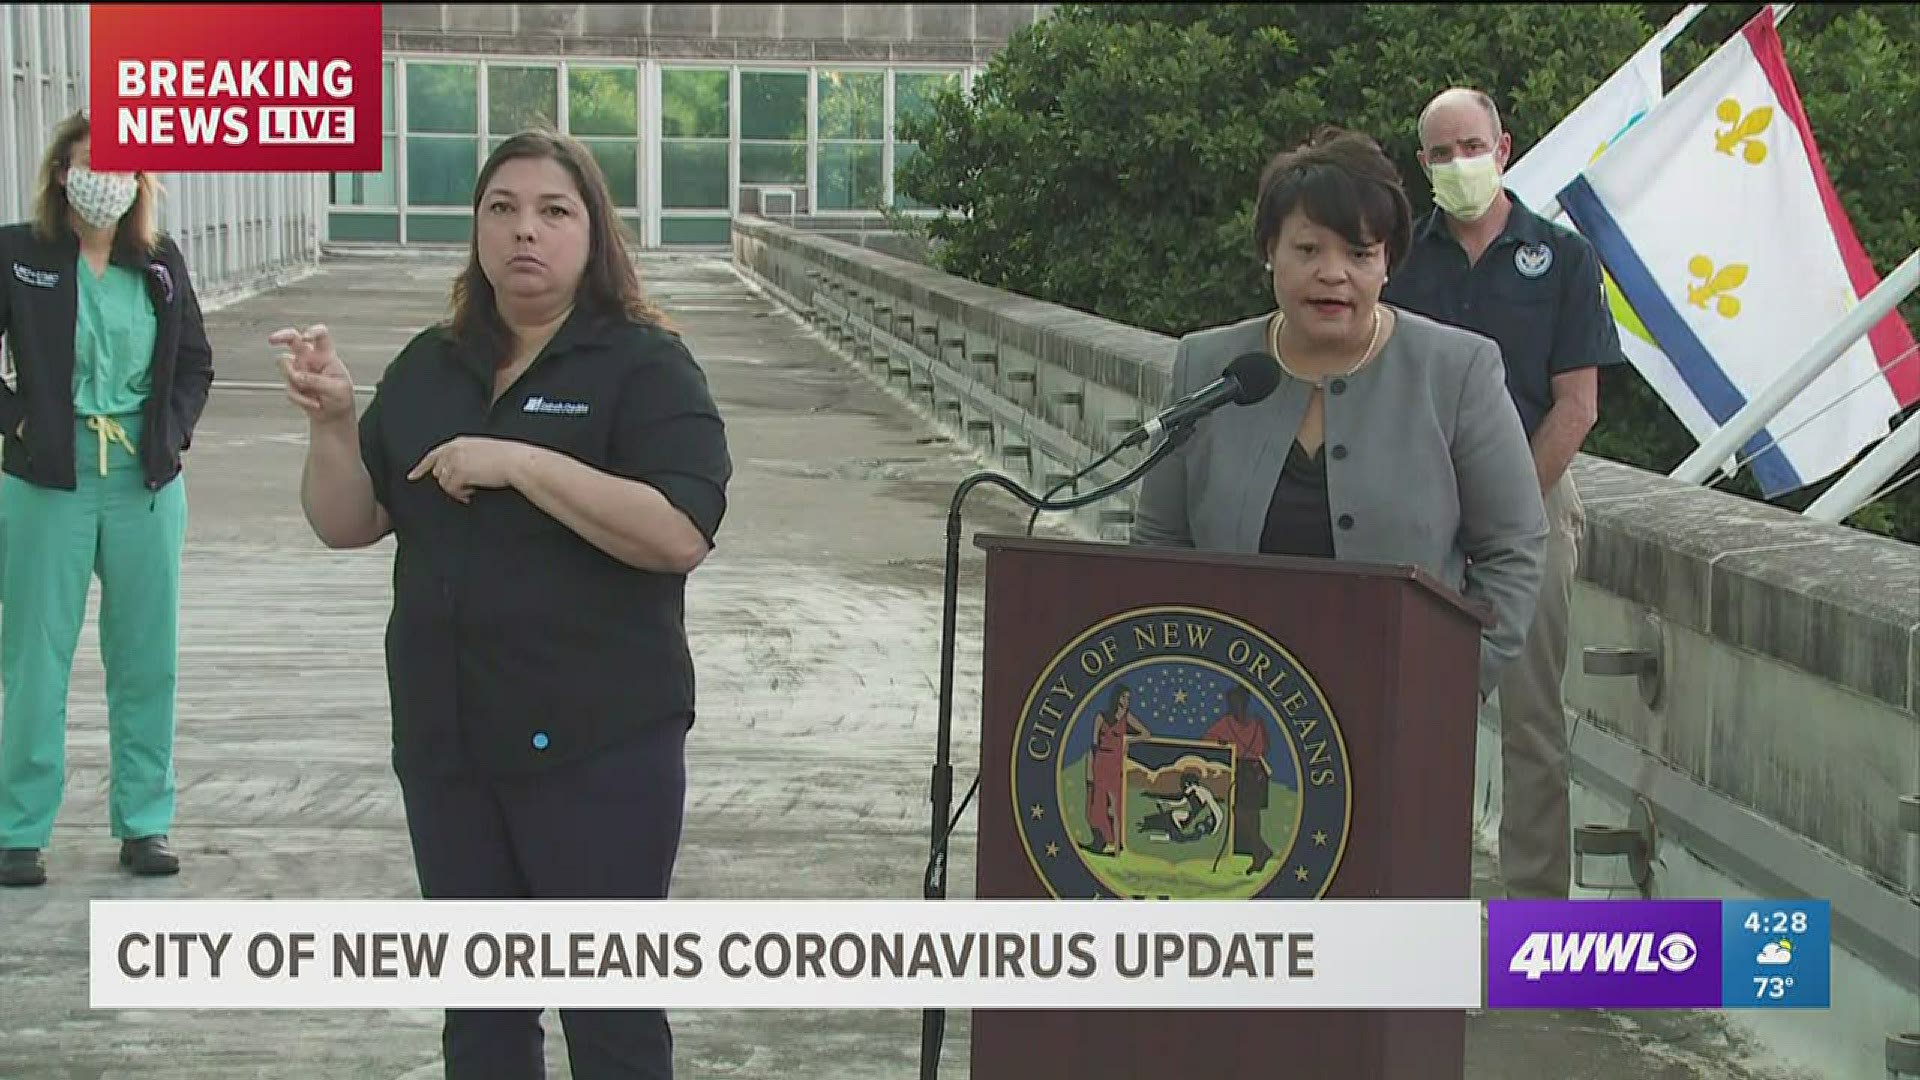 New Orleans Mayor LaToya Cantrell said she wants no large festivals in the city of New Orleans until the year 2021.